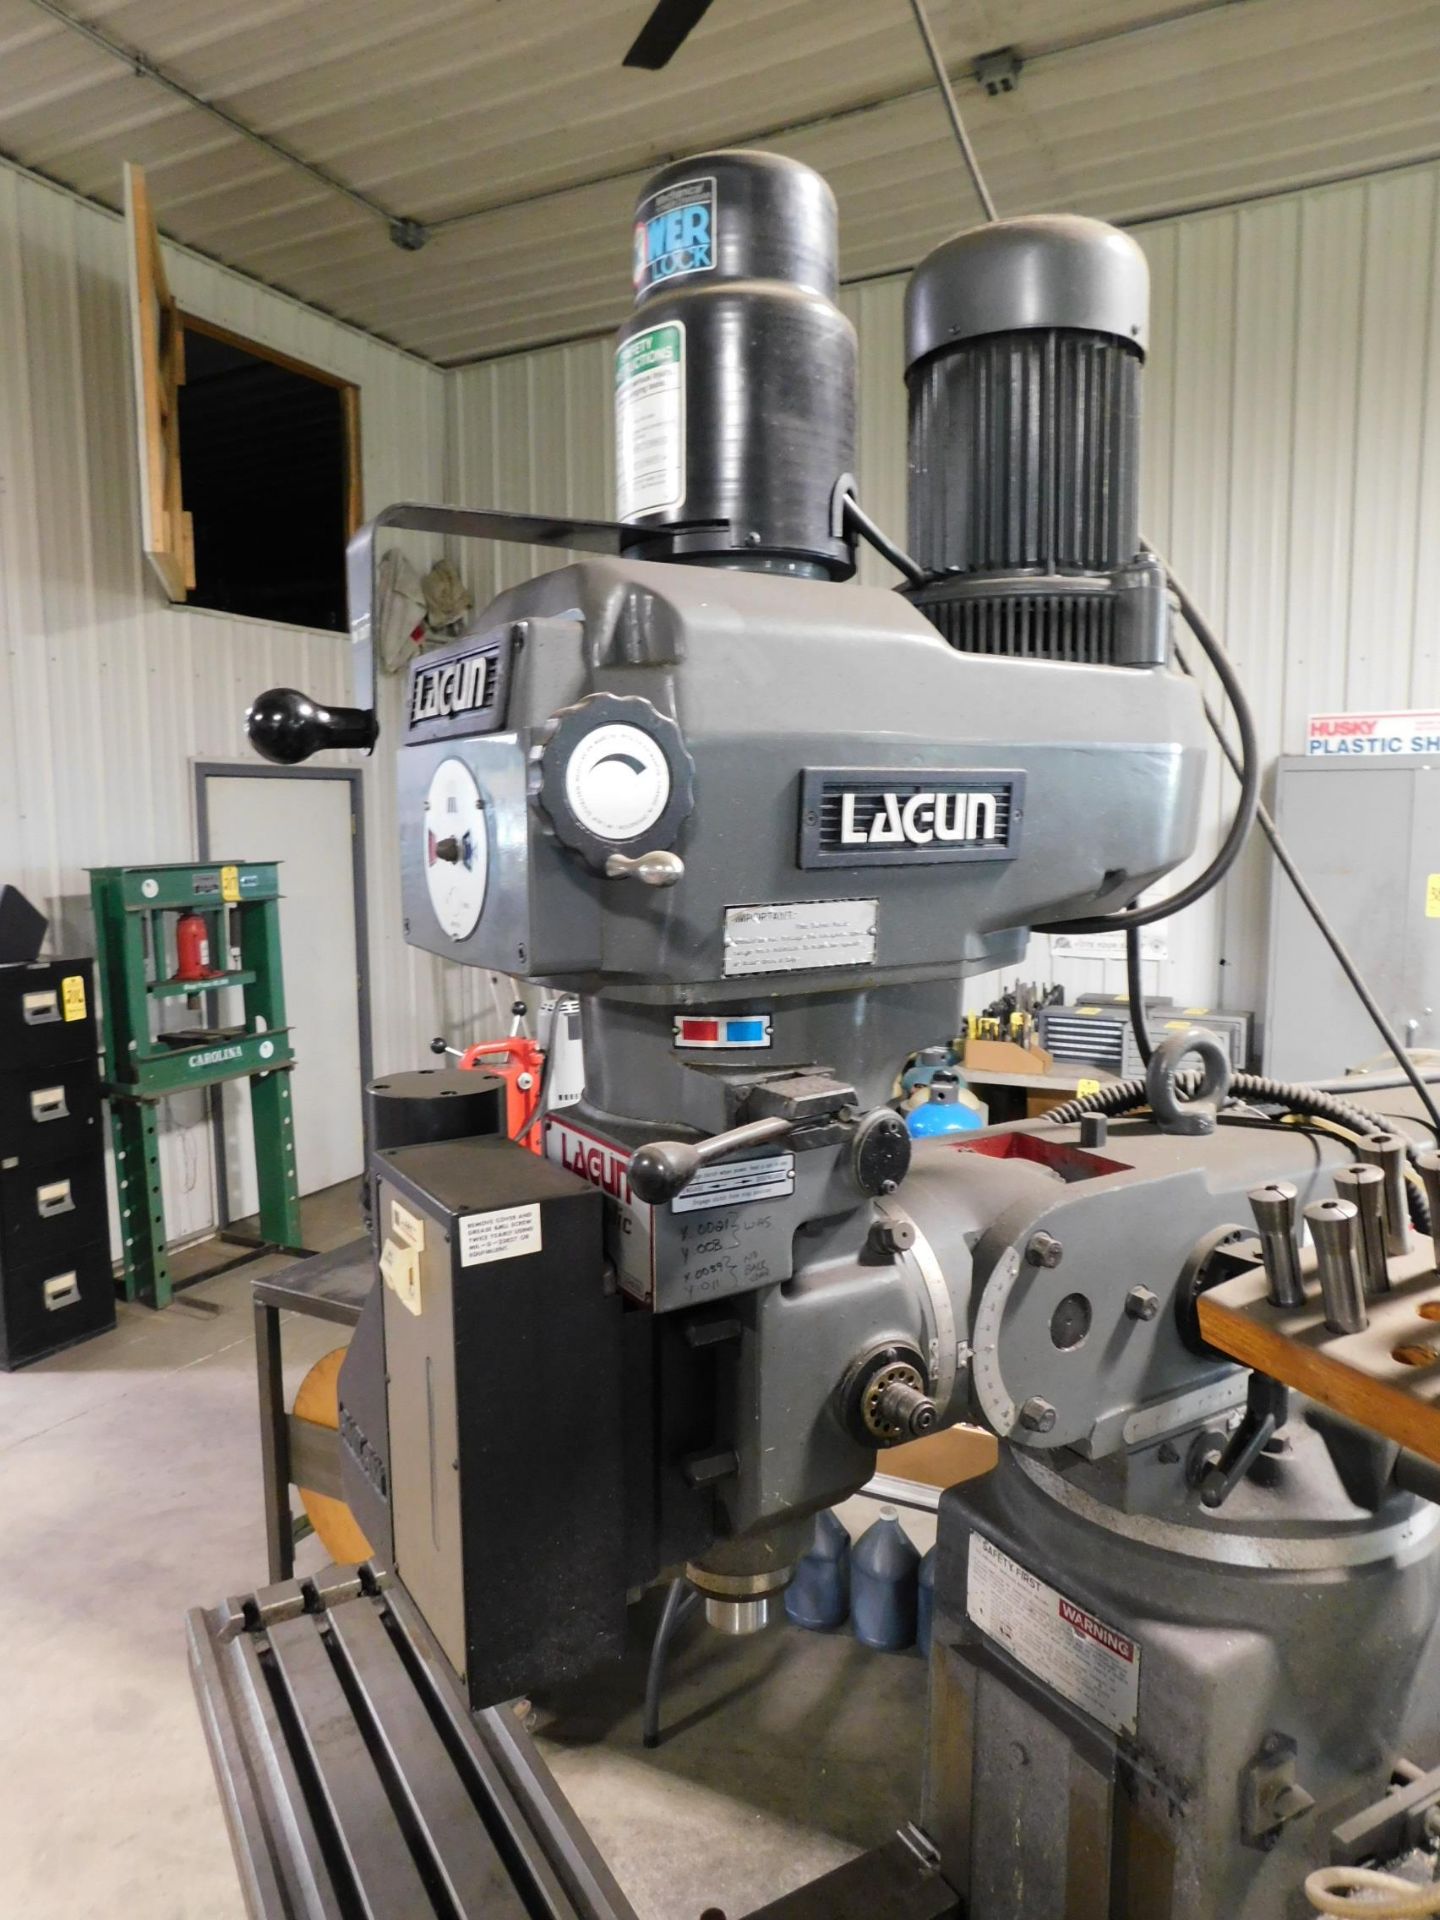 Lagun Model FTV-2 3-Axis CNC Vertical Mill SNSE-39360, w/Amilam 3300MK Control, 10"X50" Table, R-8 - Image 4 of 12